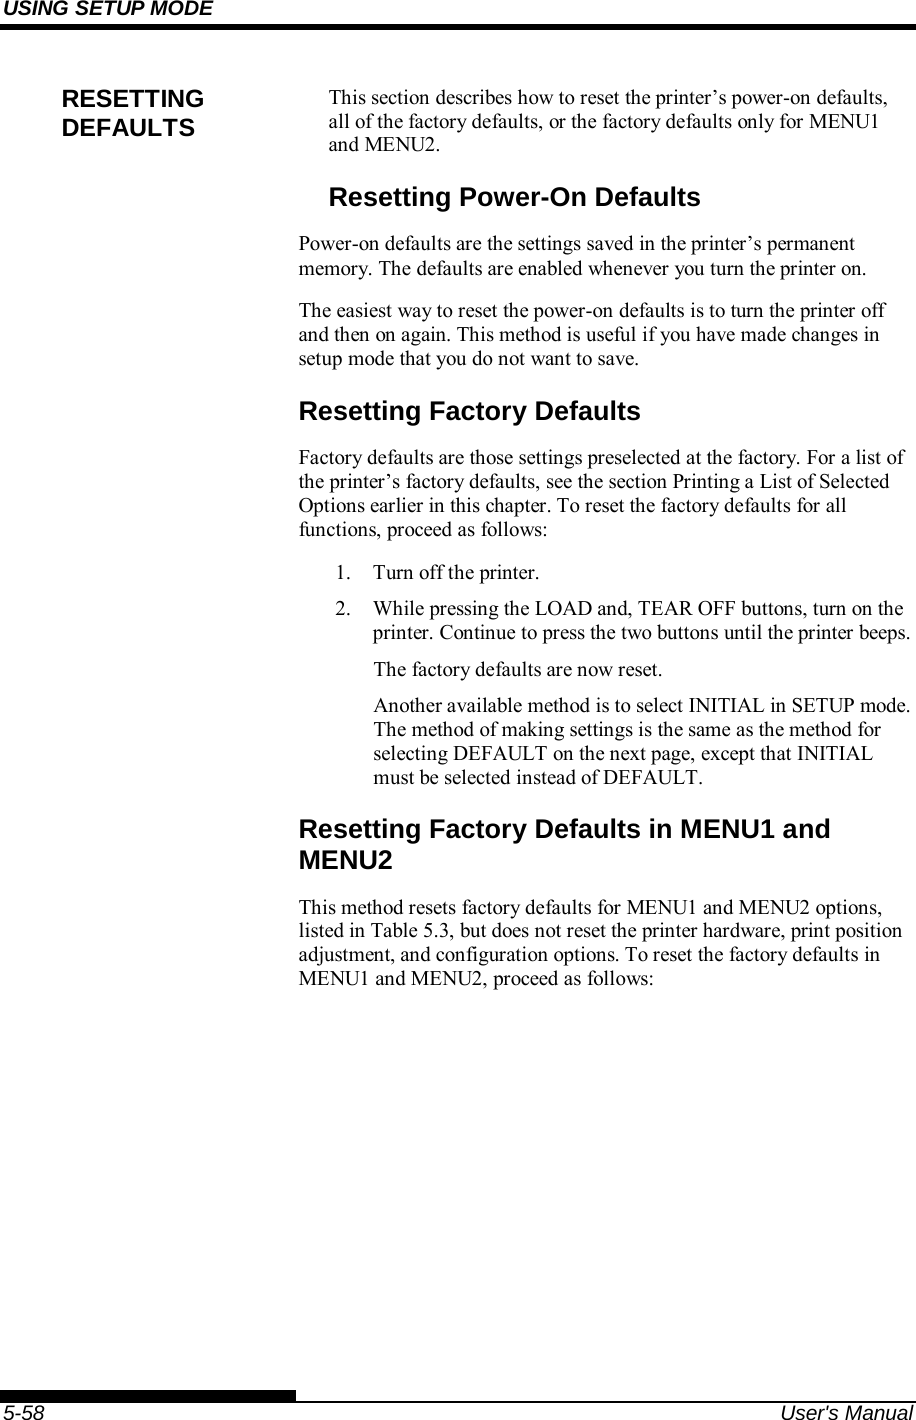 USING SETUP MODE    5-58  User&apos;s Manual This section describes how to reset the printer’s power-on defaults, all of the factory defaults, or the factory defaults only for MENU1 and MENU2. Resetting Power-On Defaults Power-on defaults are the settings saved in the printer’s permanent memory. The defaults are enabled whenever you turn the printer on. The easiest way to reset the power-on defaults is to turn the printer off and then on again. This method is useful if you have made changes in setup mode that you do not want to save. Resetting Factory Defaults Factory defaults are those settings preselected at the factory. For a list of the printer’s factory defaults, see the section Printing a List of Selected Options earlier in this chapter. To reset the factory defaults for all functions, proceed as follows: 1.  Turn off the printer. 2.  While pressing the LOAD and, TEAR OFF buttons, turn on the printer. Continue to press the two buttons until the printer beeps. The factory defaults are now reset. Another available method is to select INITIAL in SETUP mode.  The method of making settings is the same as the method for selecting DEFAULT on the next page, except that INITIAL must be selected instead of DEFAULT. Resetting Factory Defaults in MENU1 and MENU2 This method resets factory defaults for MENU1 and MENU2 options, listed in Table 5.3, but does not reset the printer hardware, print position adjustment, and configuration options. To reset the factory defaults in MENU1 and MENU2, proceed as follows: RESETTING DEFAULTS 